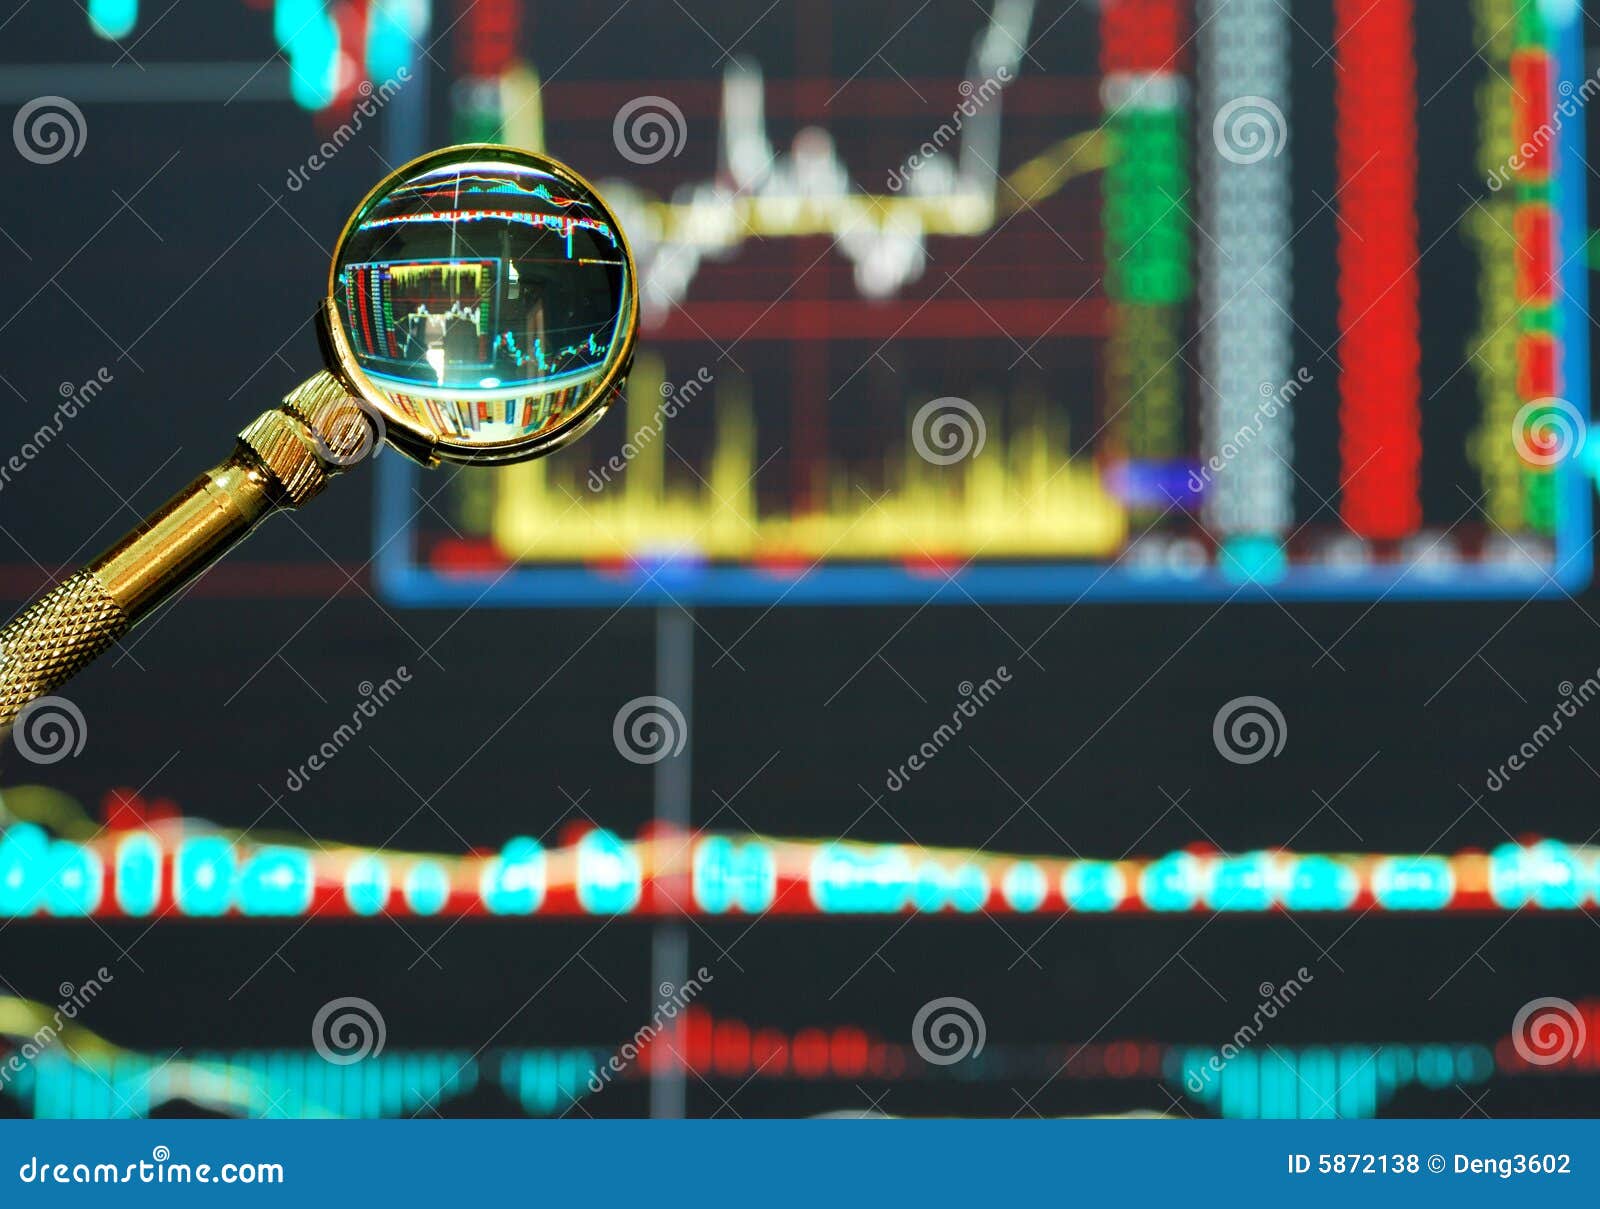 Stock numbers stock photo. Image of communication, information - 5872138